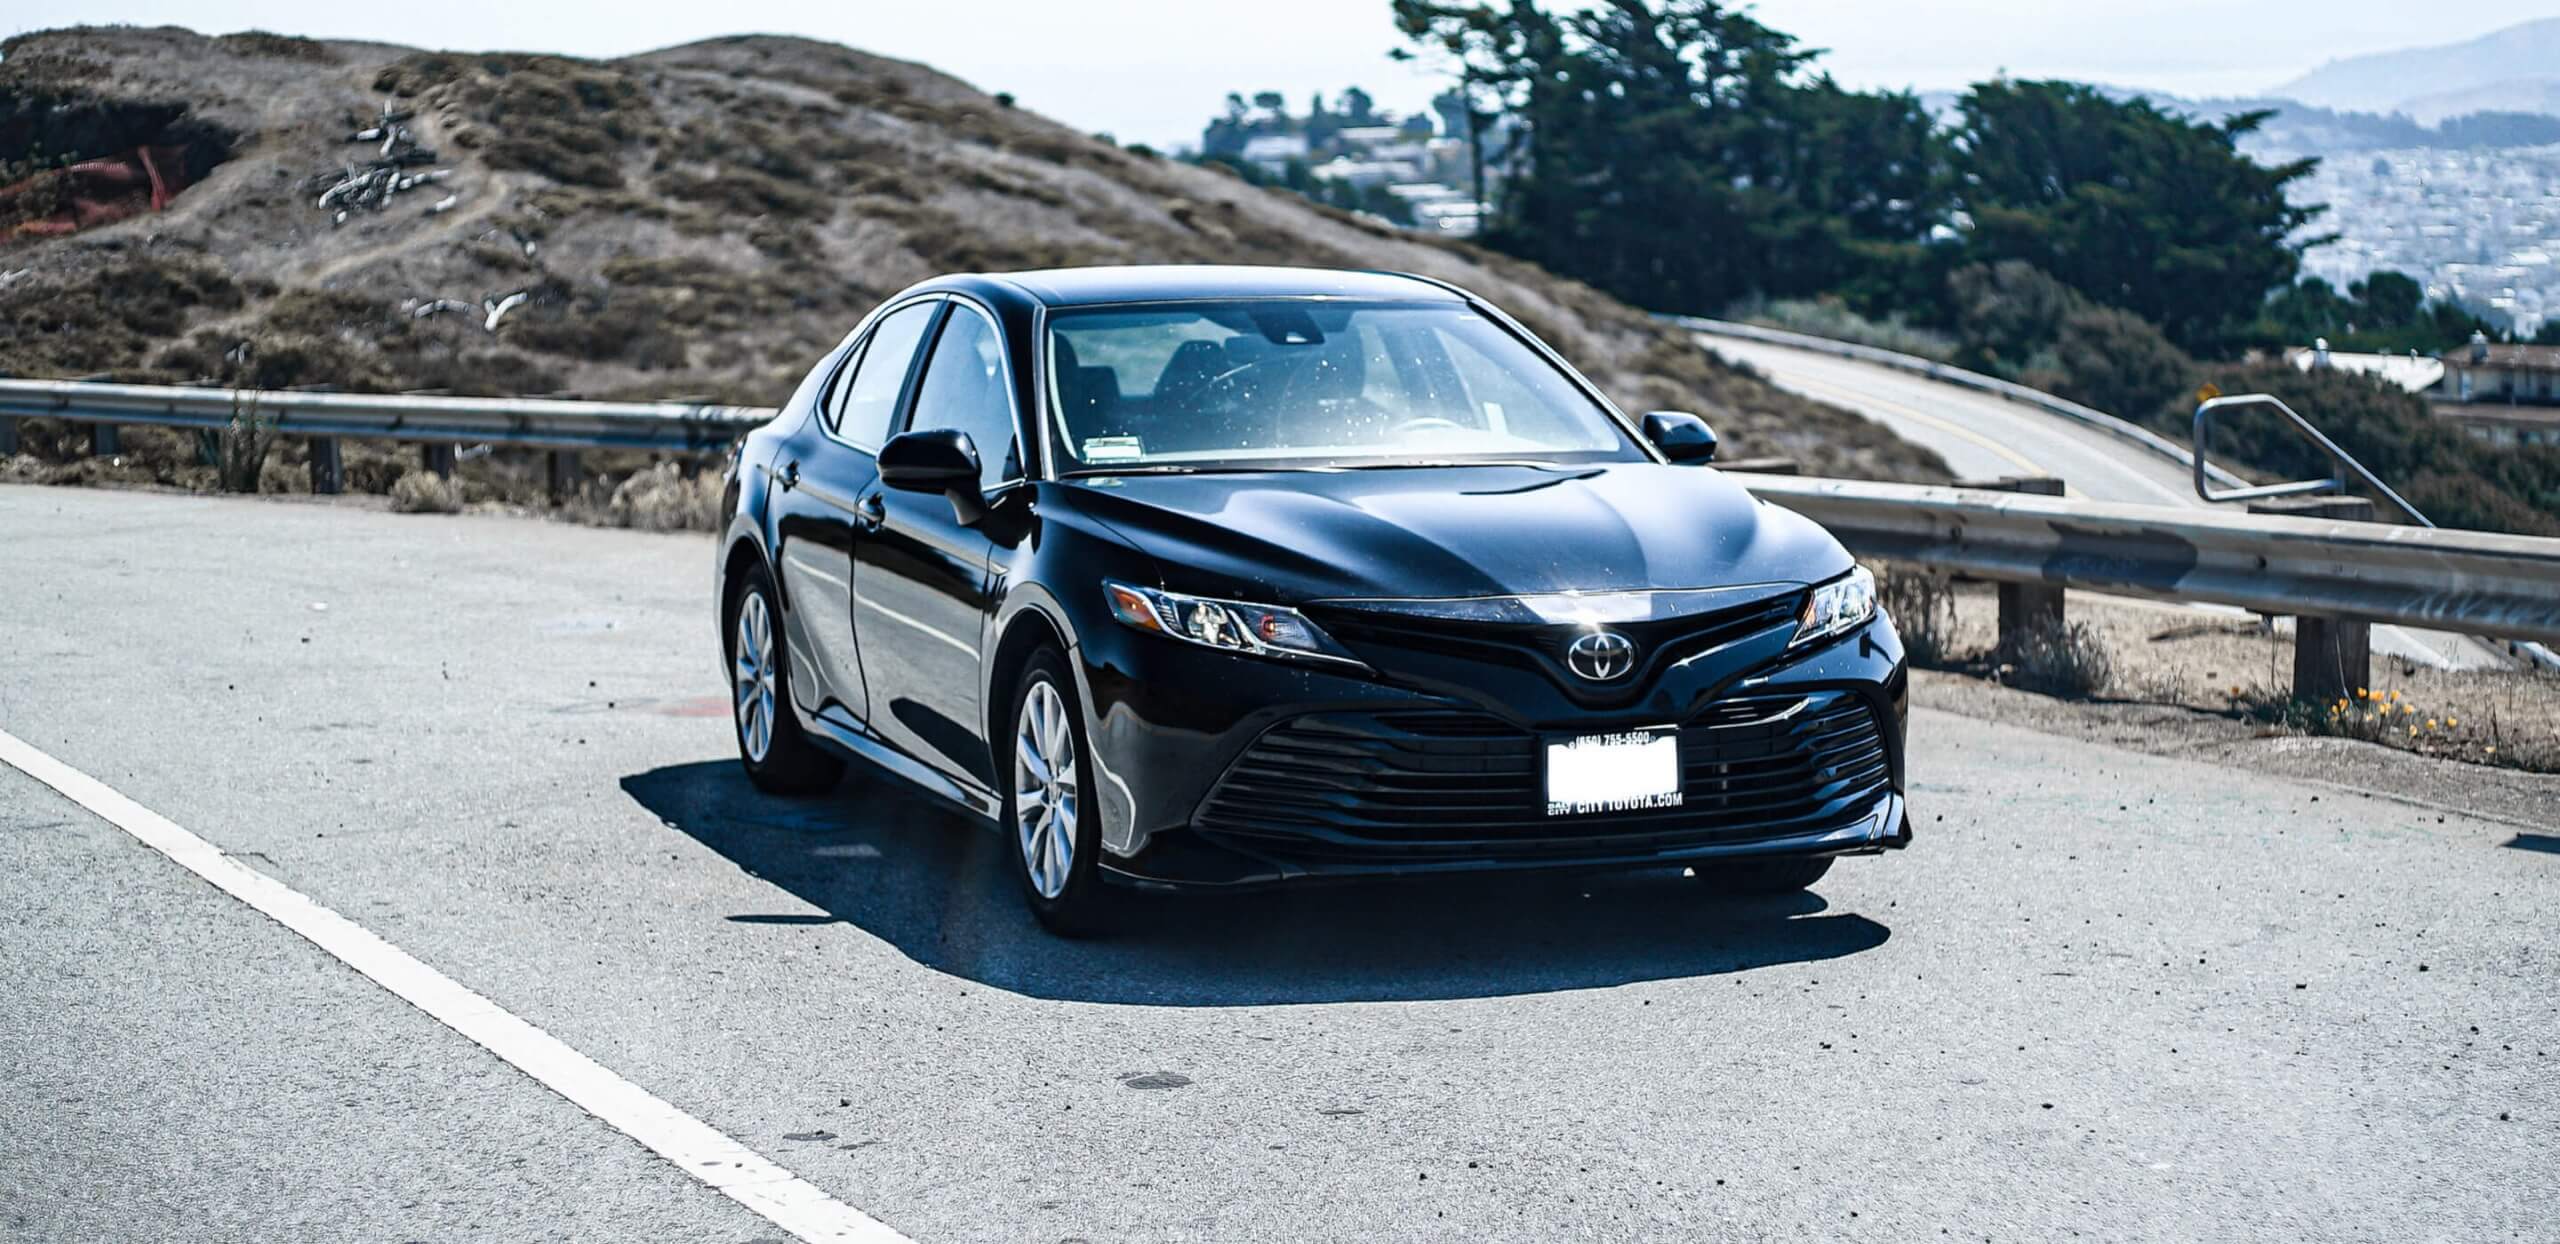 2020-toyota-camry-black-featured-image